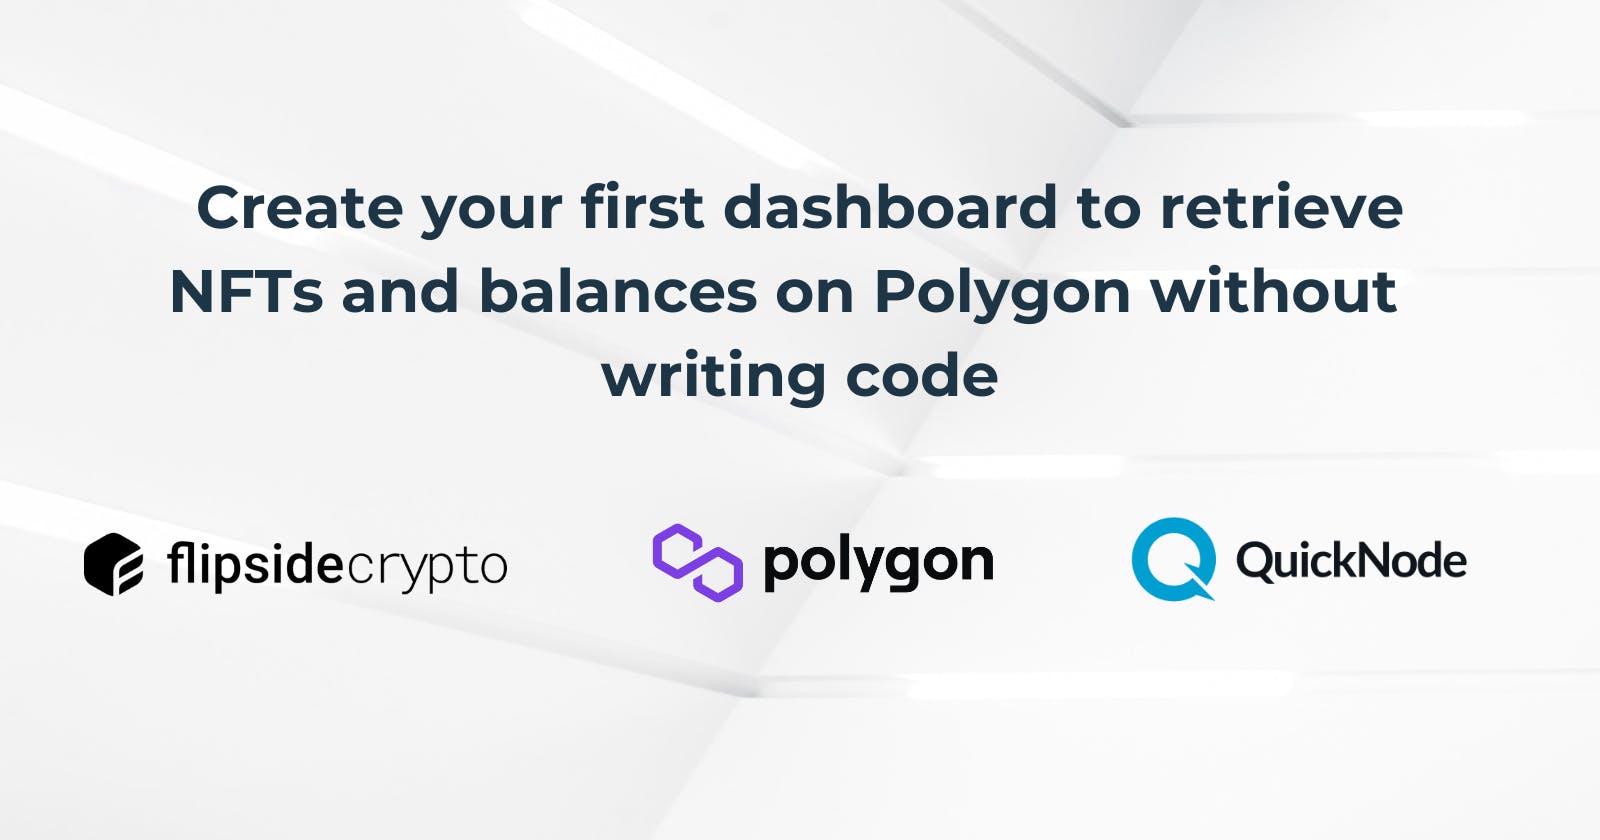 Create your first dashboard to retrieve NFTs and balances on Polygon without writing code